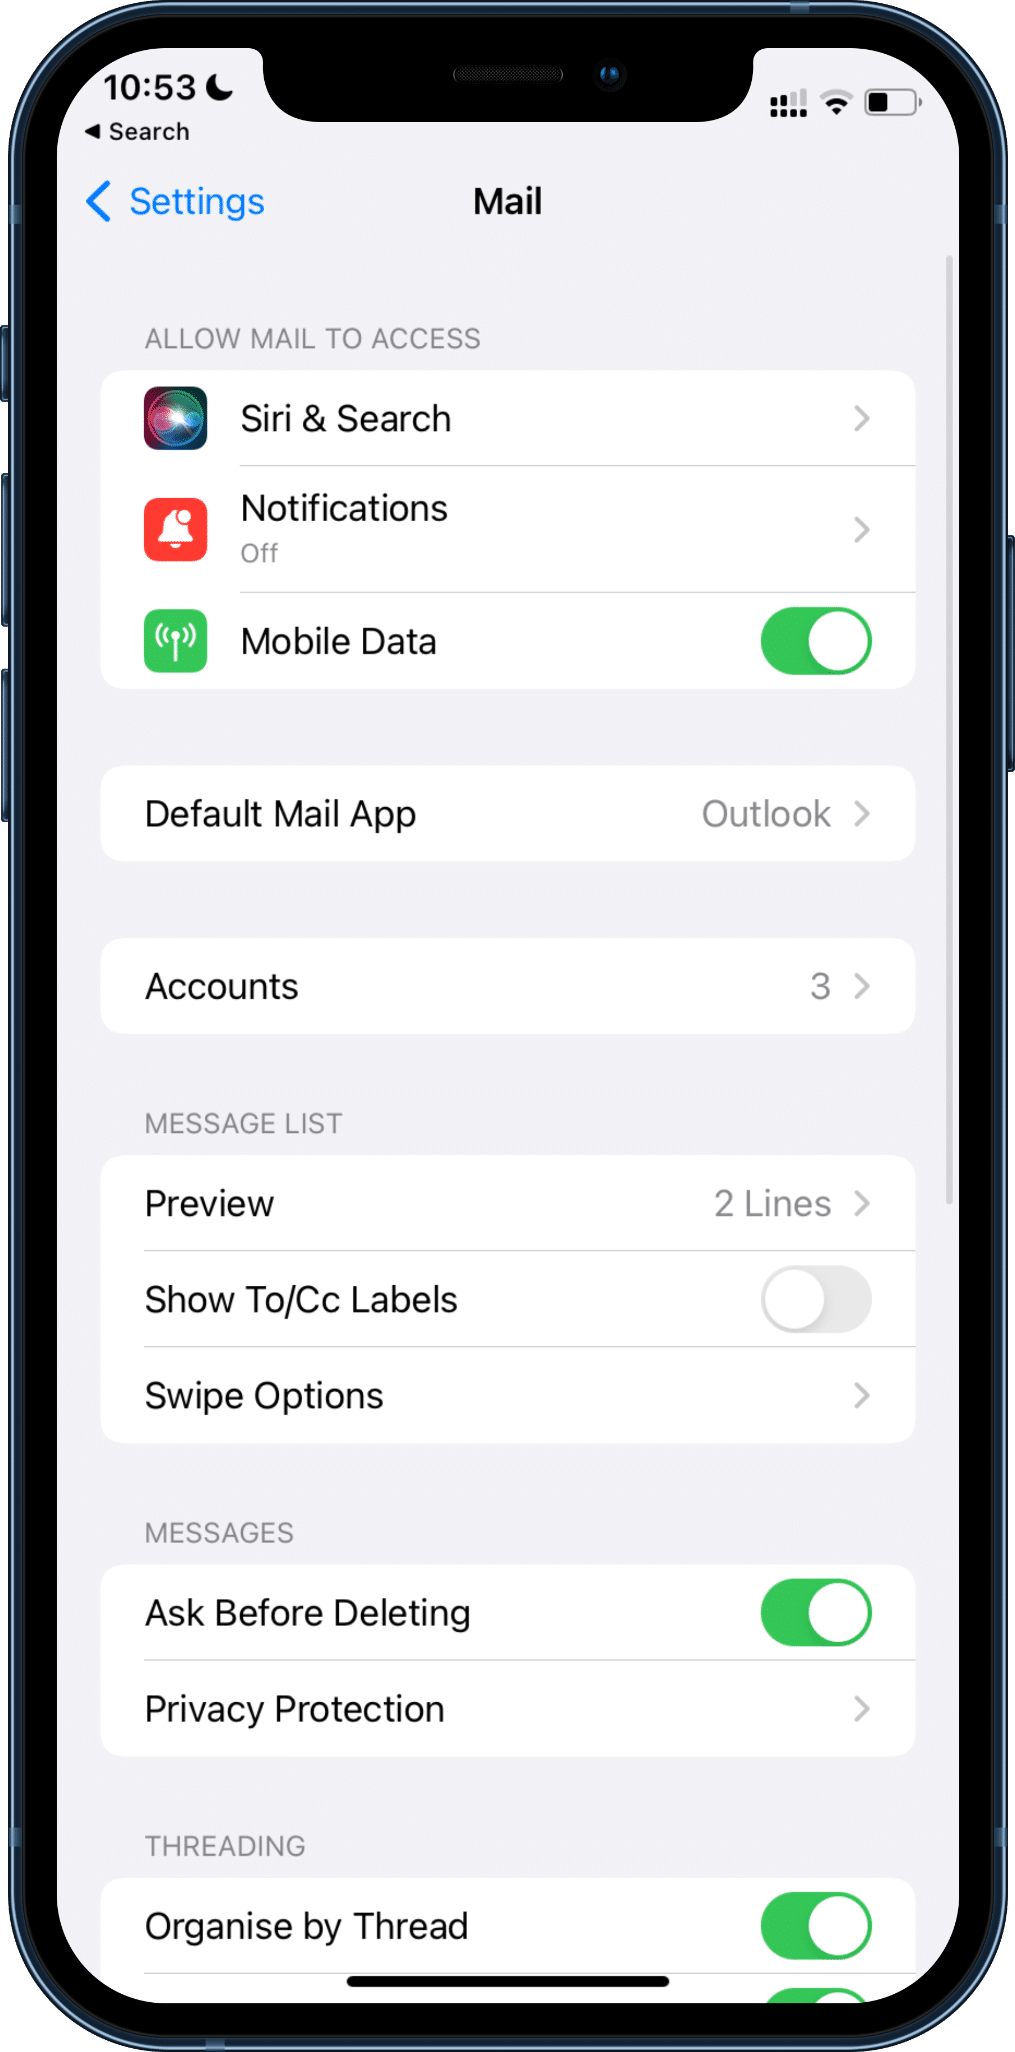 enable mobile data for mail app